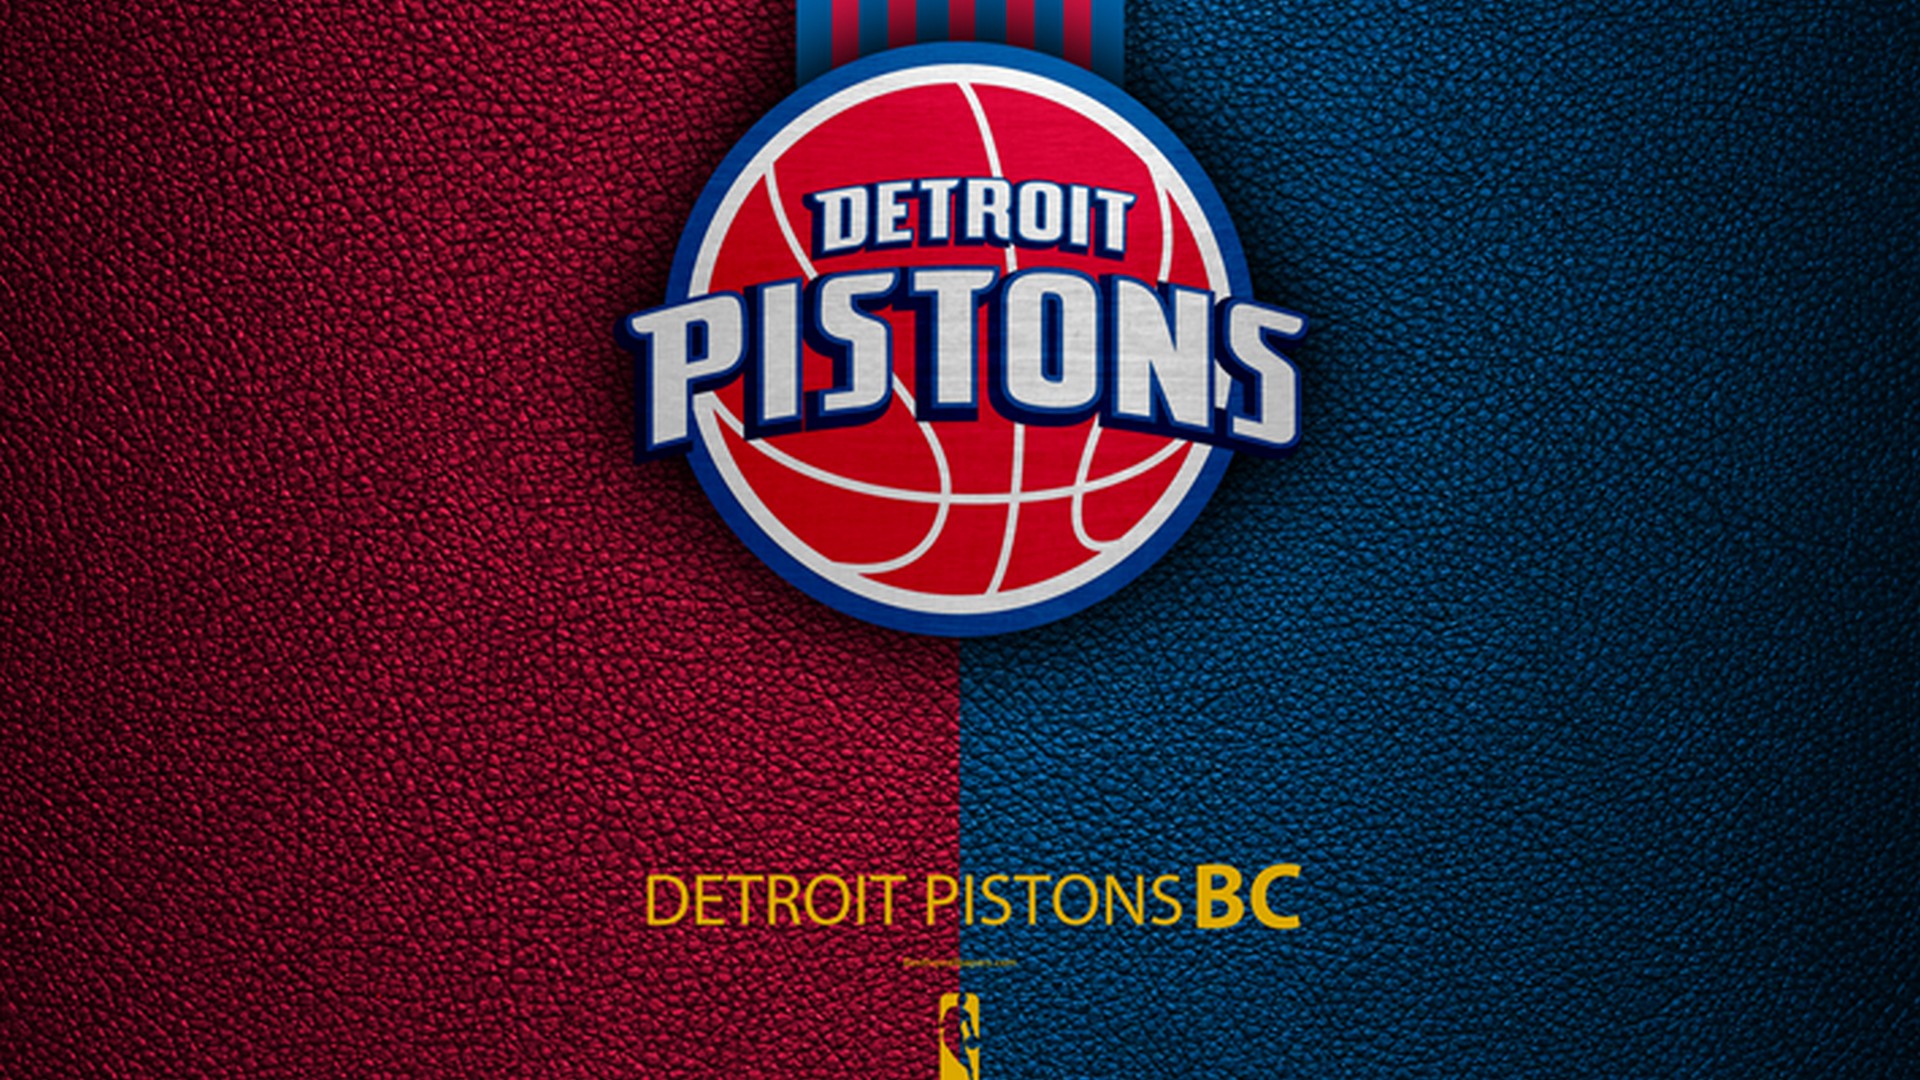 Wallpapers Detroit Pistons Logo with high-resolution 1920x1080 pixel. You can use this wallpaper for your Desktop Computer Backgrounds, Windows or Mac Screensavers, iPhone Lock screen, Tablet or Android and another Mobile Phone device